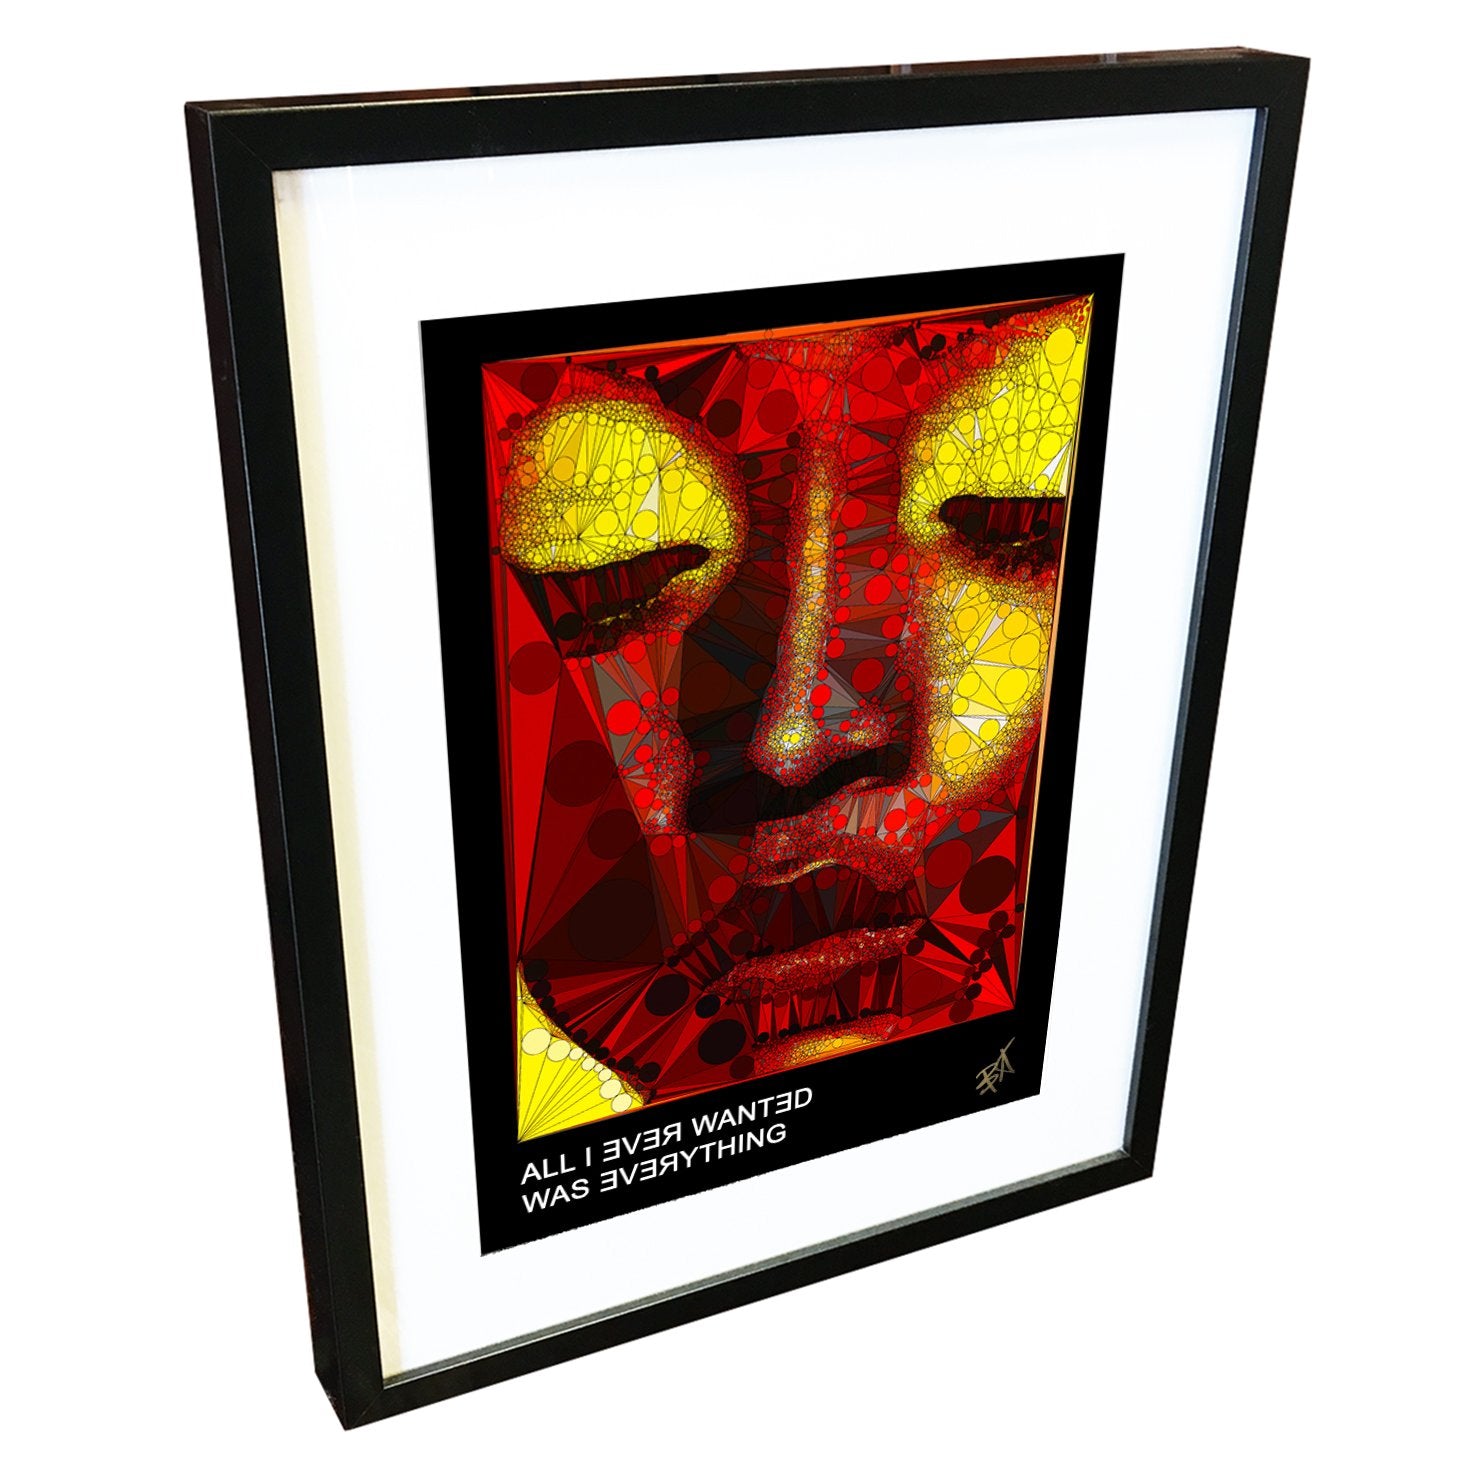 Nefertiti by Baiba Auria - signed art print with quote - Egoiste Gallery - Art Gallery in Manchester City Centre